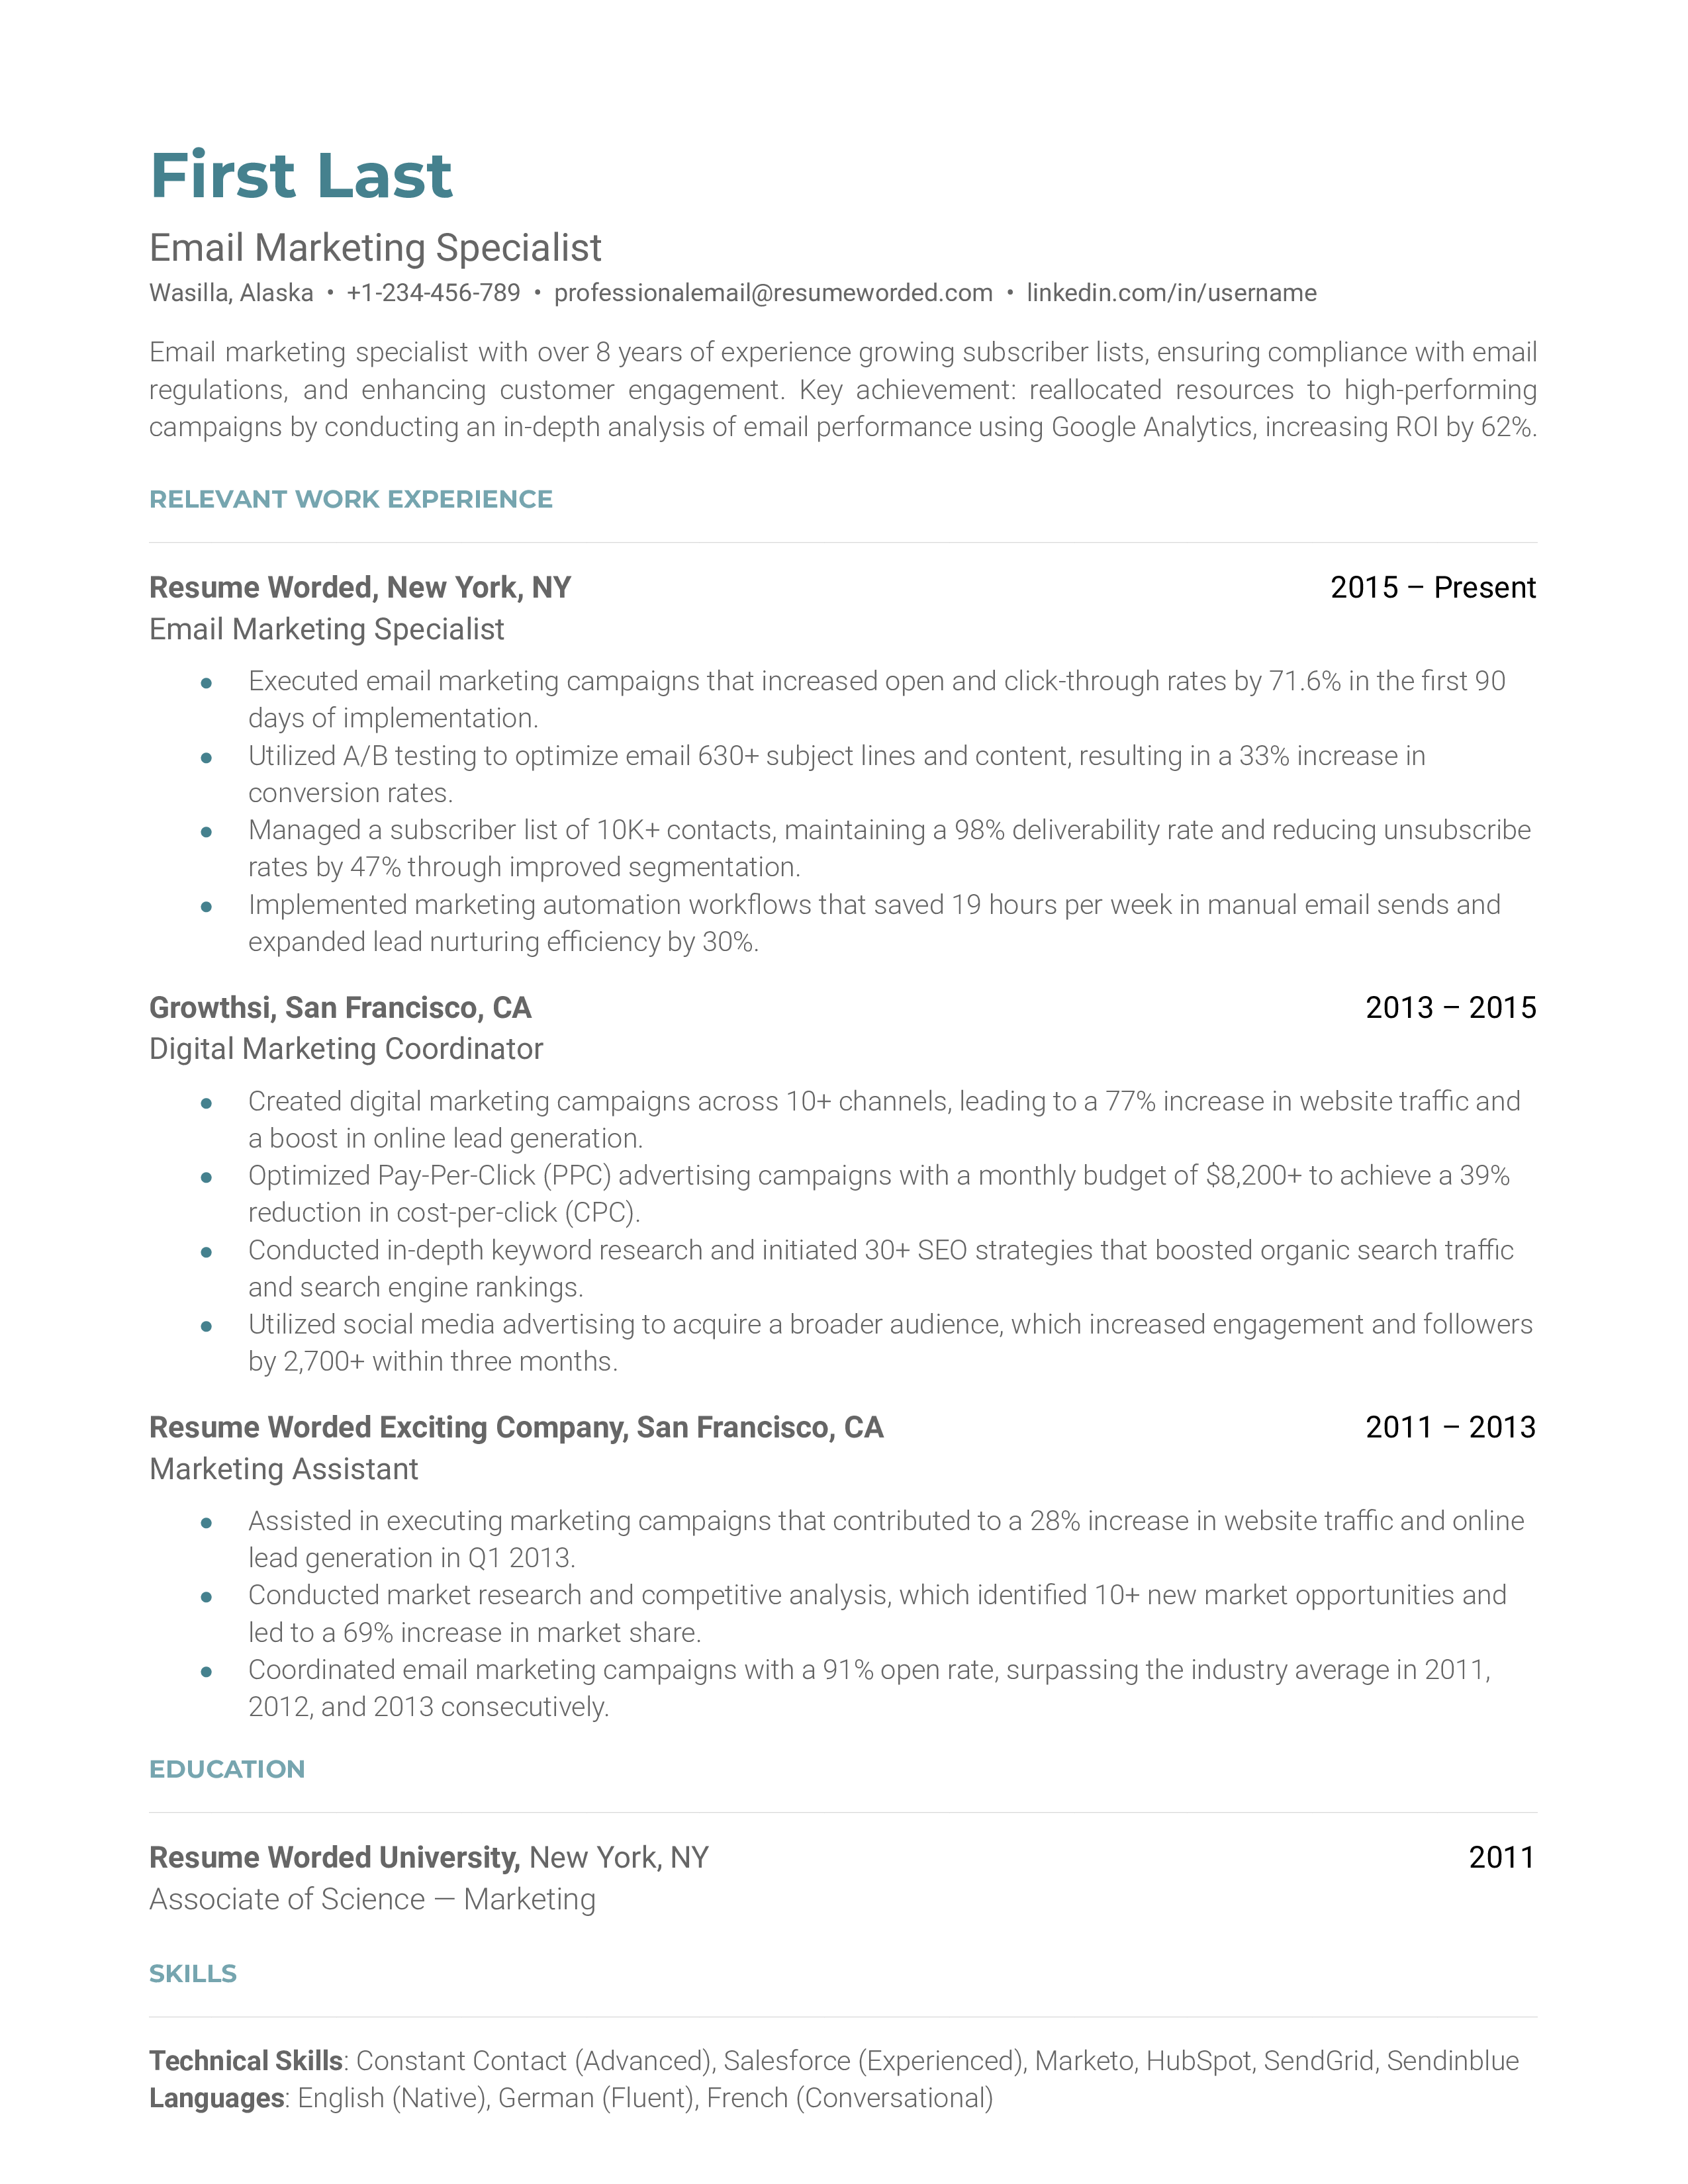 Professional resume for an Email Marketing Specialist showcasing relevant skills and achievements.